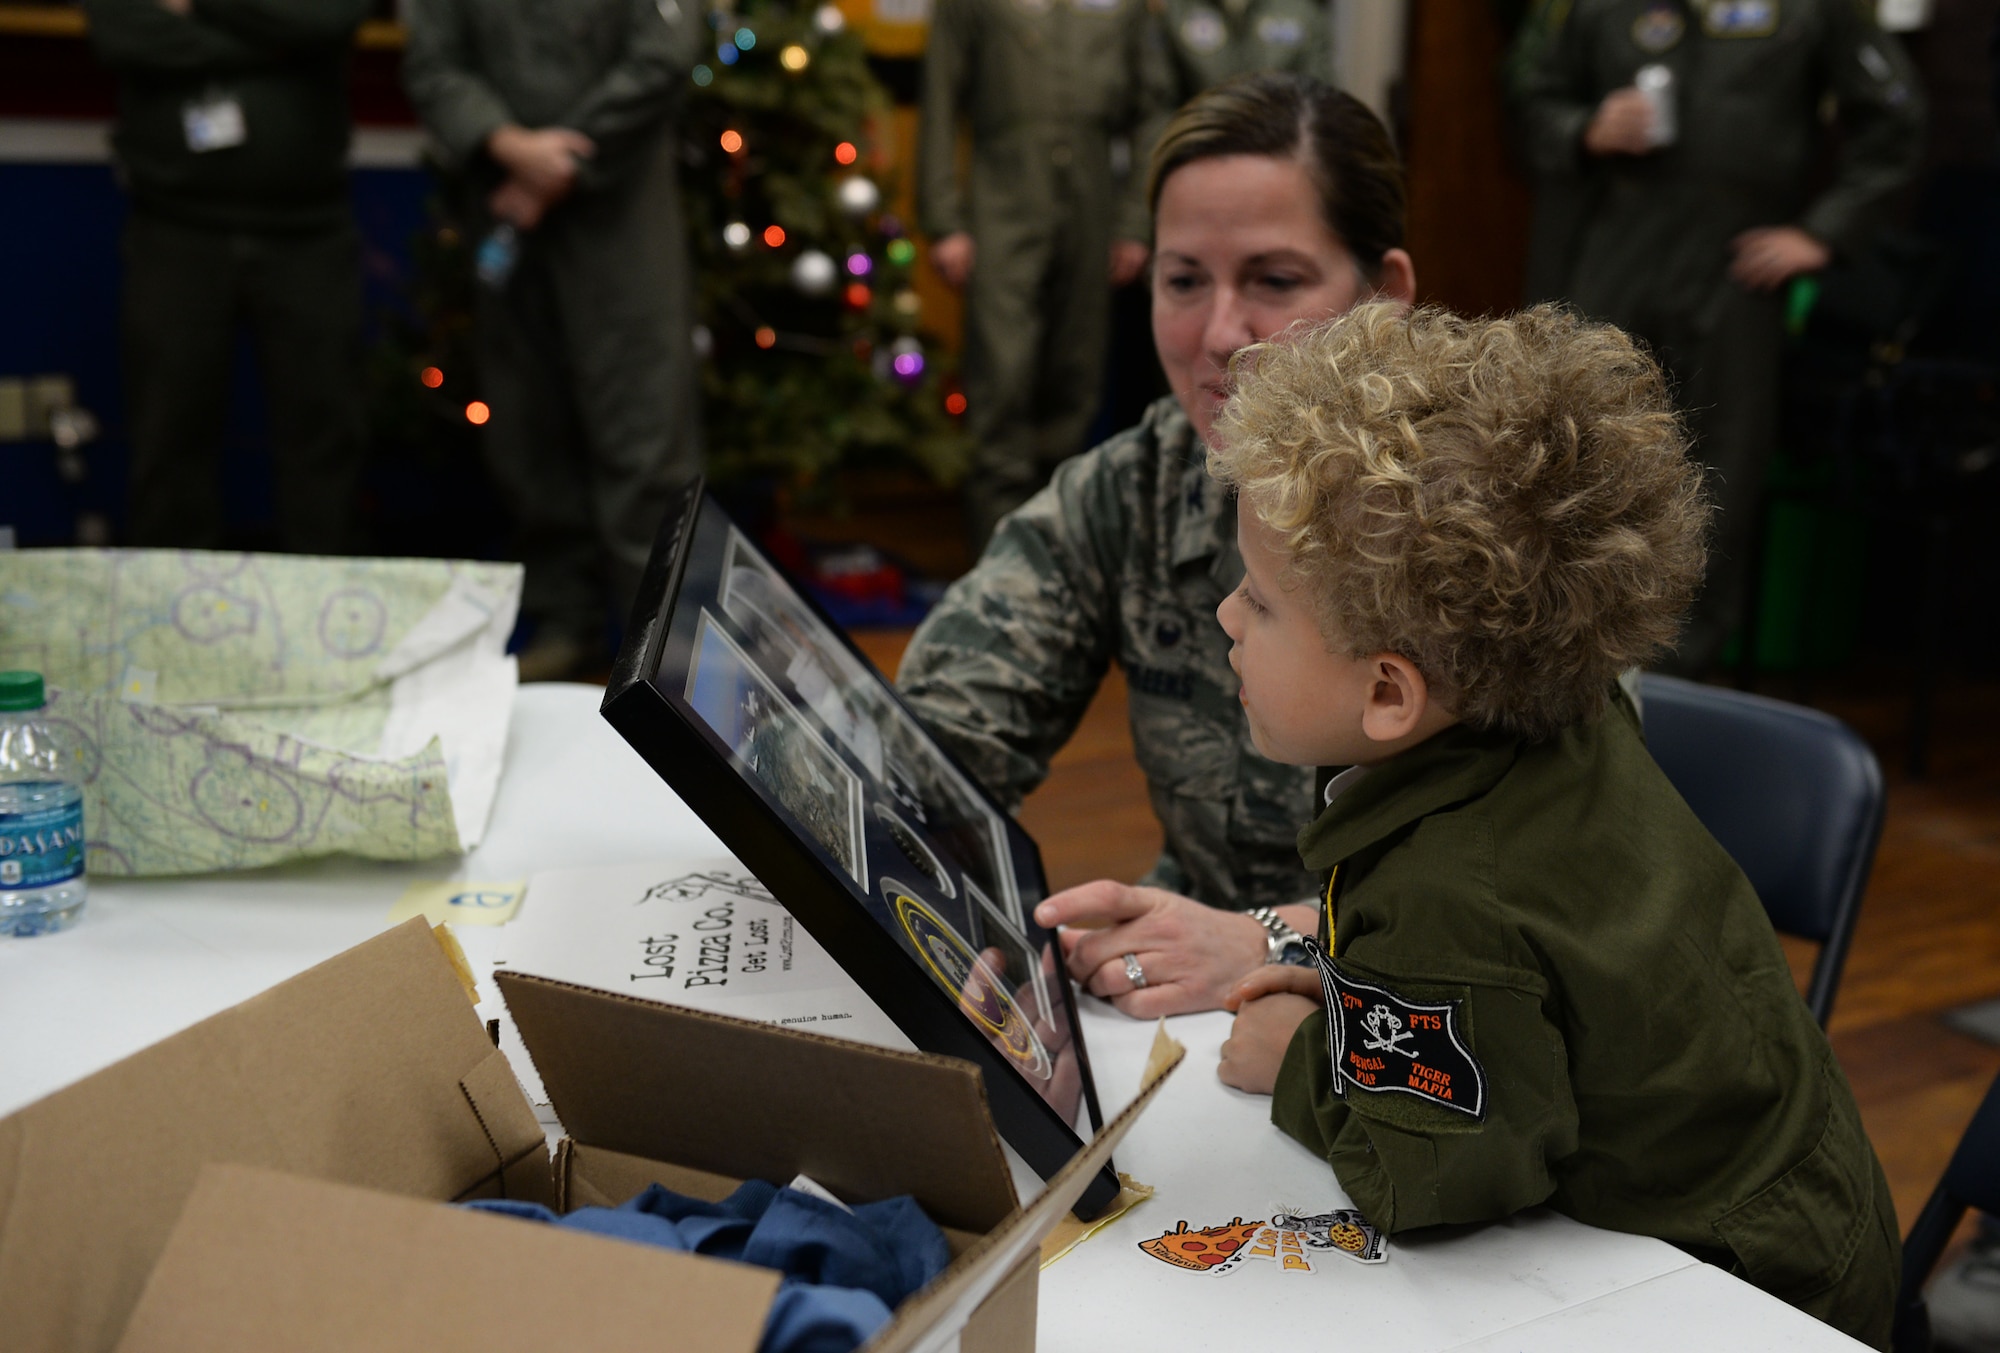 Tobias Taylor, Pilot for a Day, looks at a plaque of his hero shot and coin commemorating his time on base with Col. Samantha Weeks, 14th Flying Training Wing commander, Dec. 6, 2018, on Columbus Air Force Base, Mississippi. Weeks presented the plaque during lunch, thanking Tobias and his family for visiting Columbus AFB. (U.S. Air Force photo by Airman Hannah Bean)